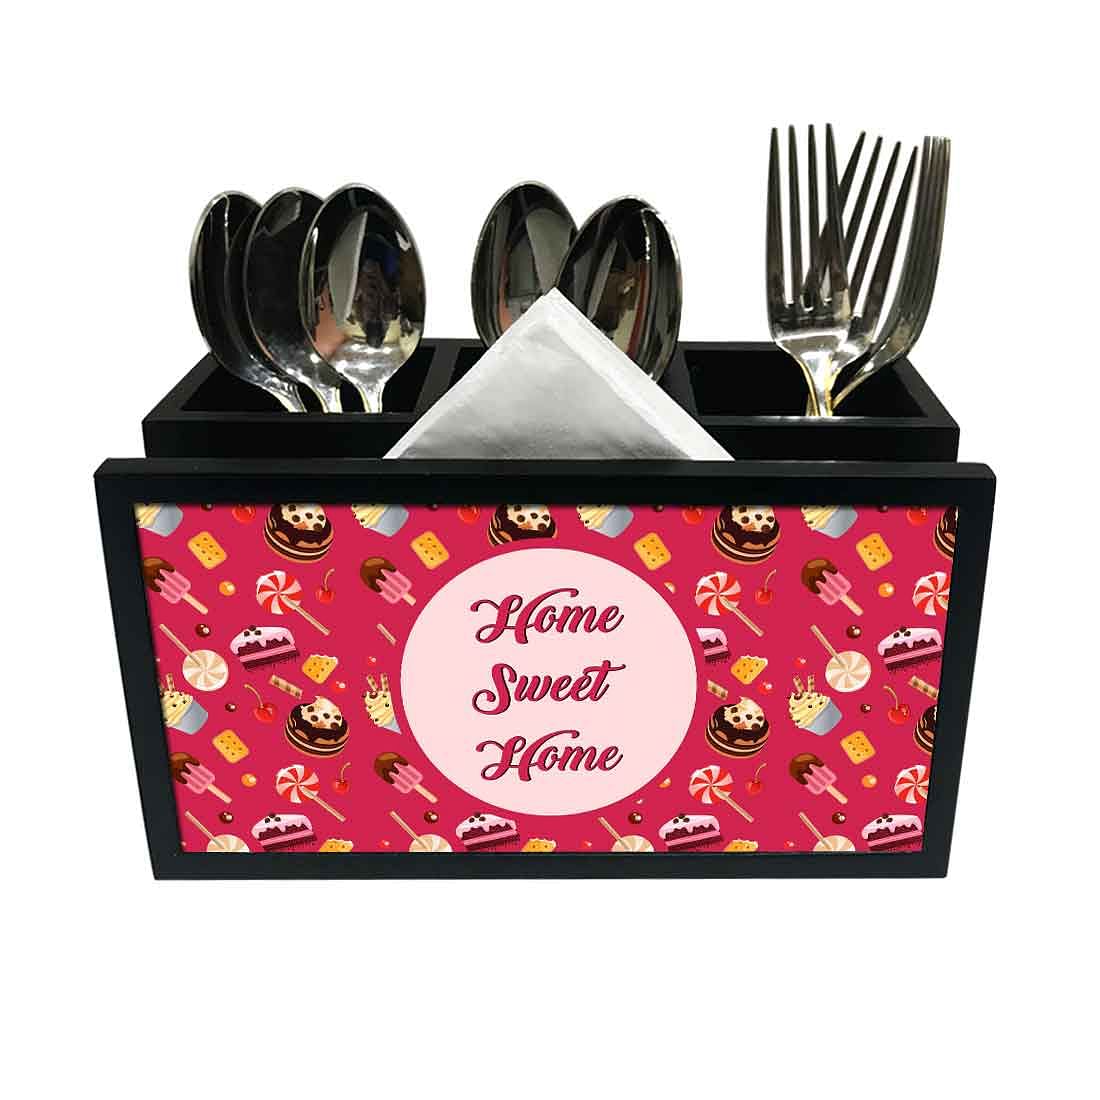 Cutlery Tissue Holder Napkin Stand -  Chocolate Candy Nutcase